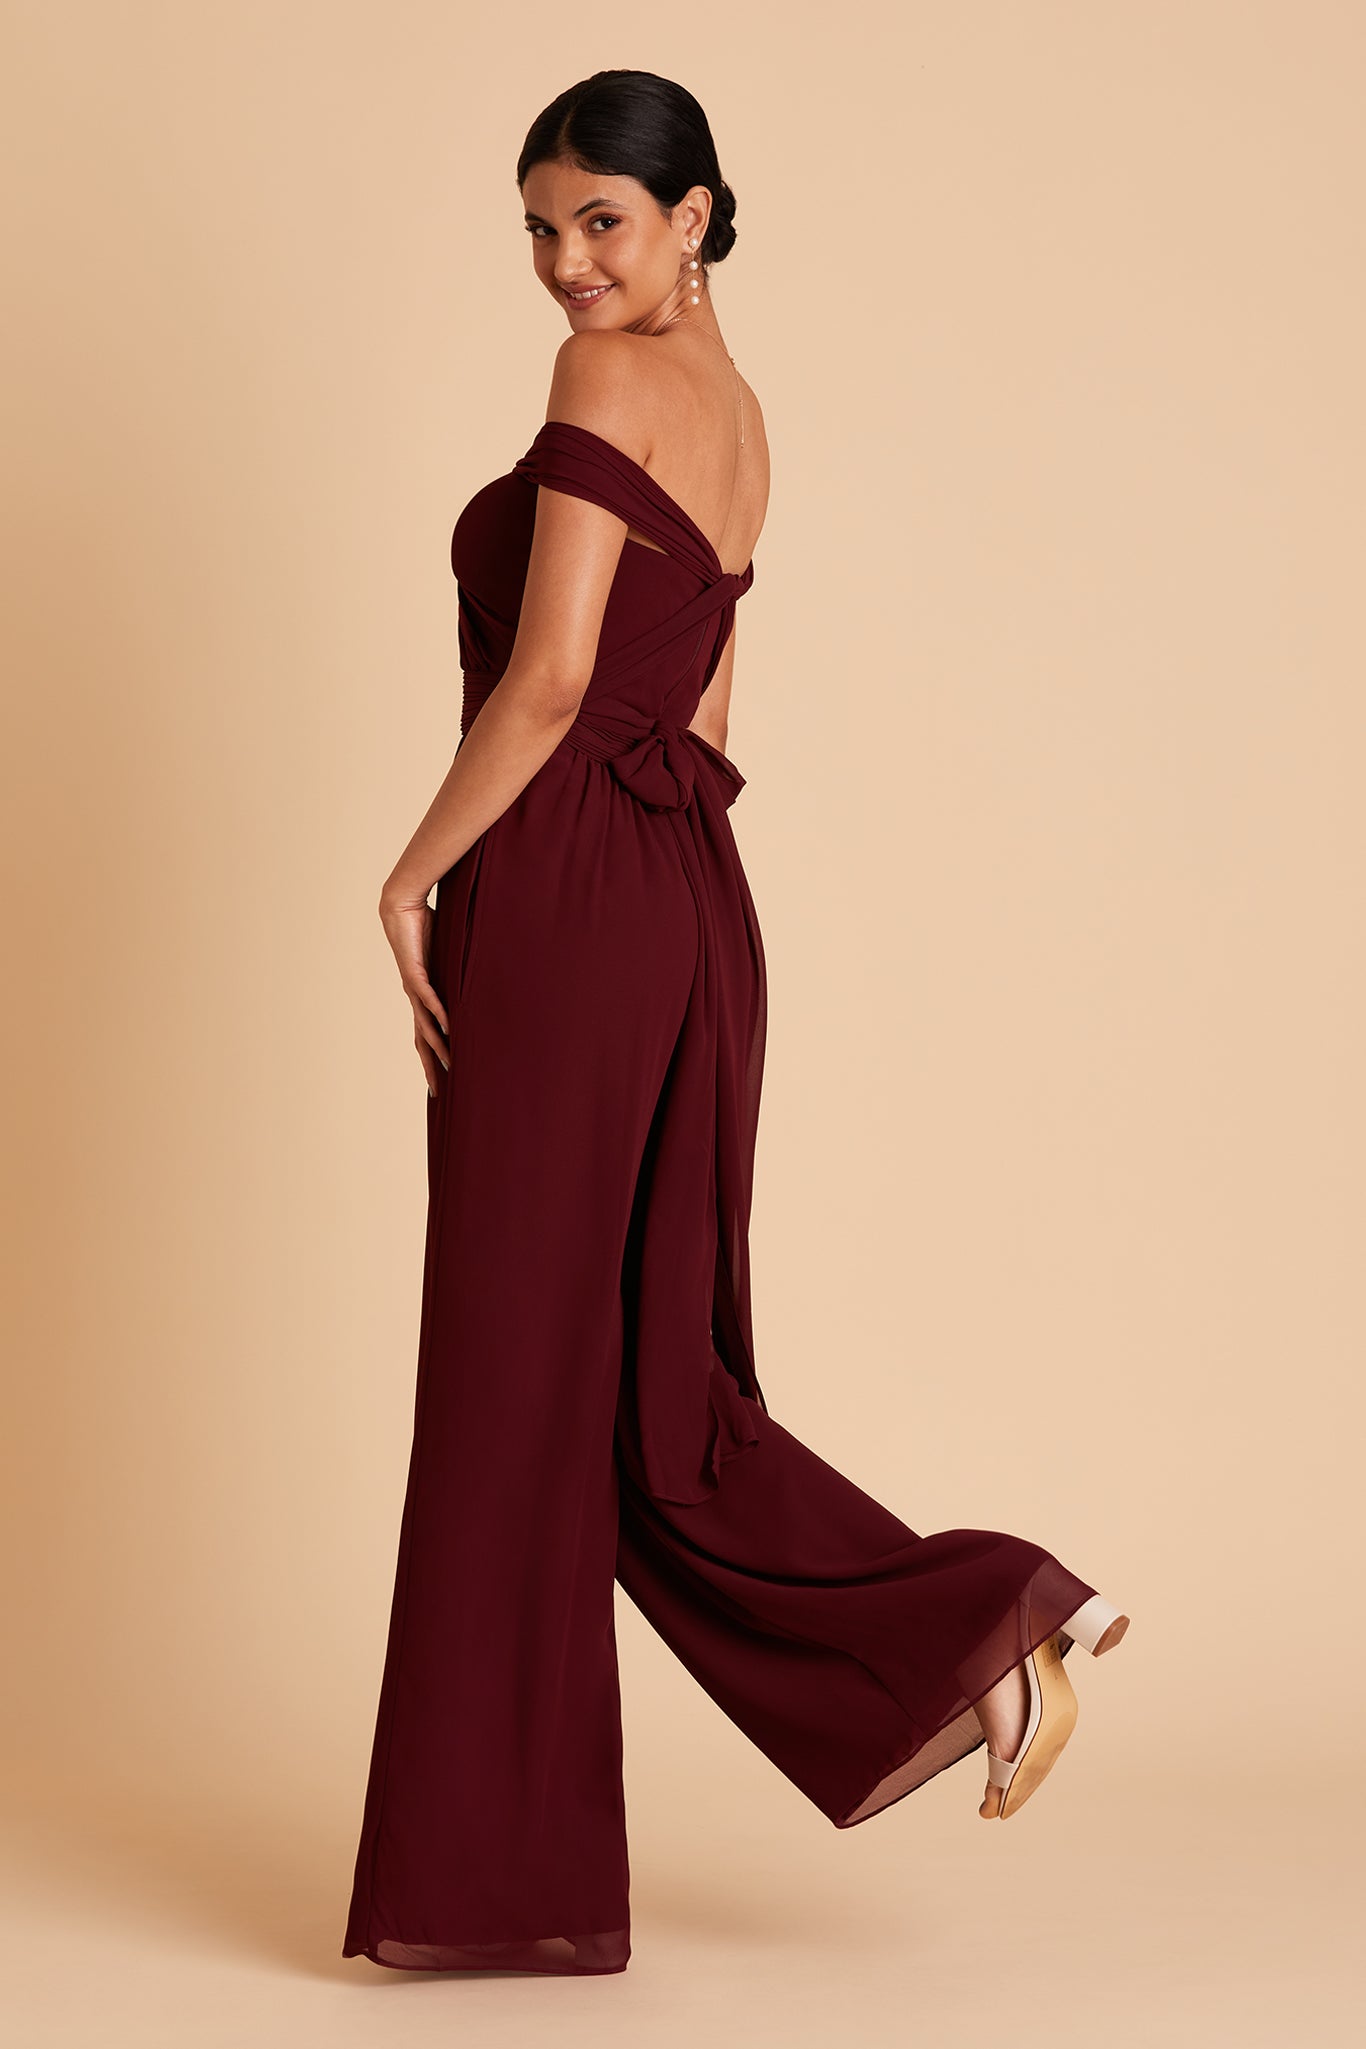 Gigi convertible jumpsuit in cabernet chiffon by Birdy Grey, side view